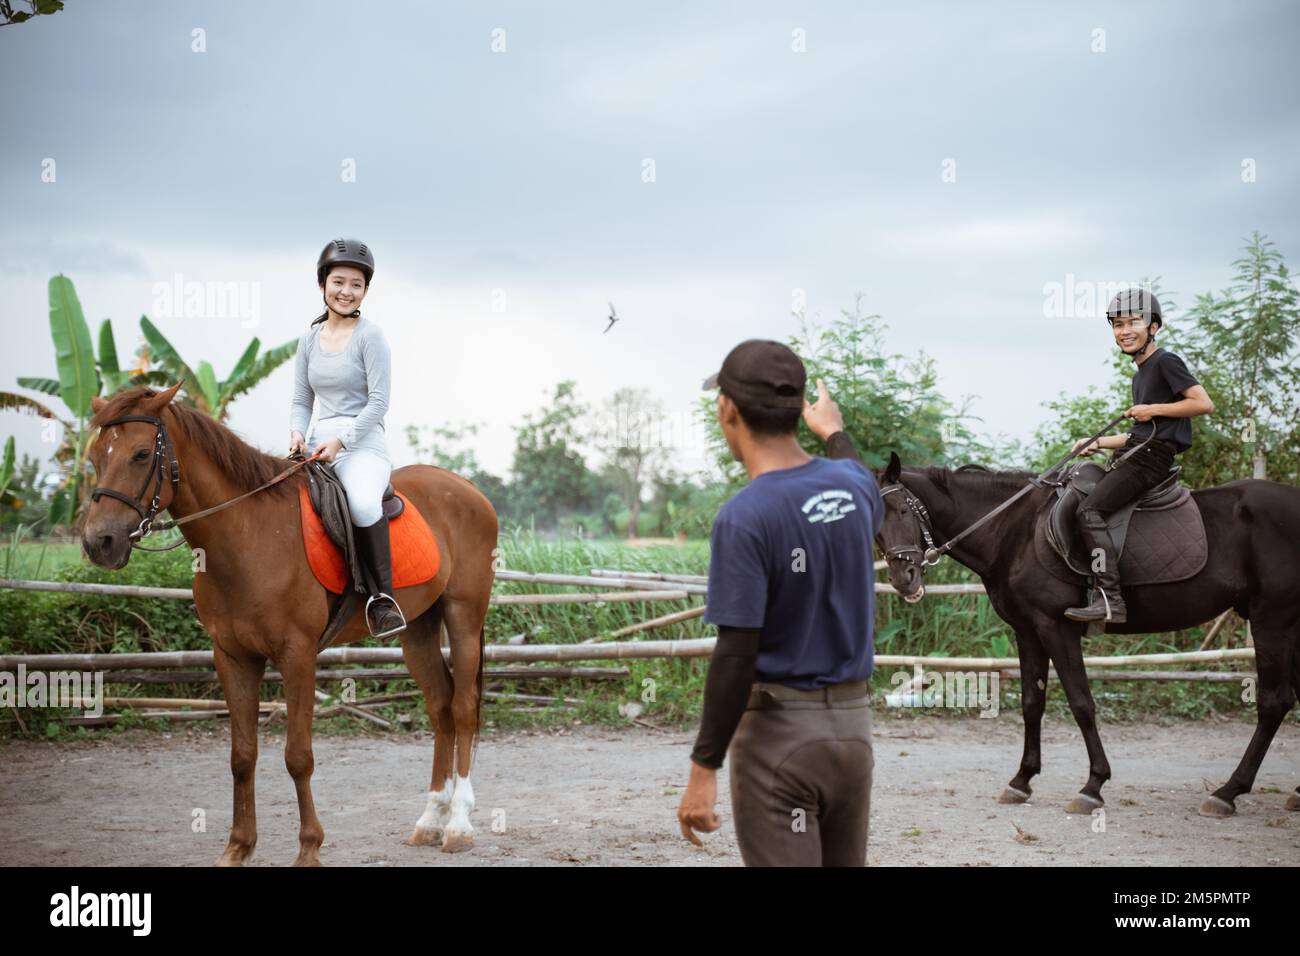 two equestrian athletes riding horses listening to trainer standing guide Stock Photo